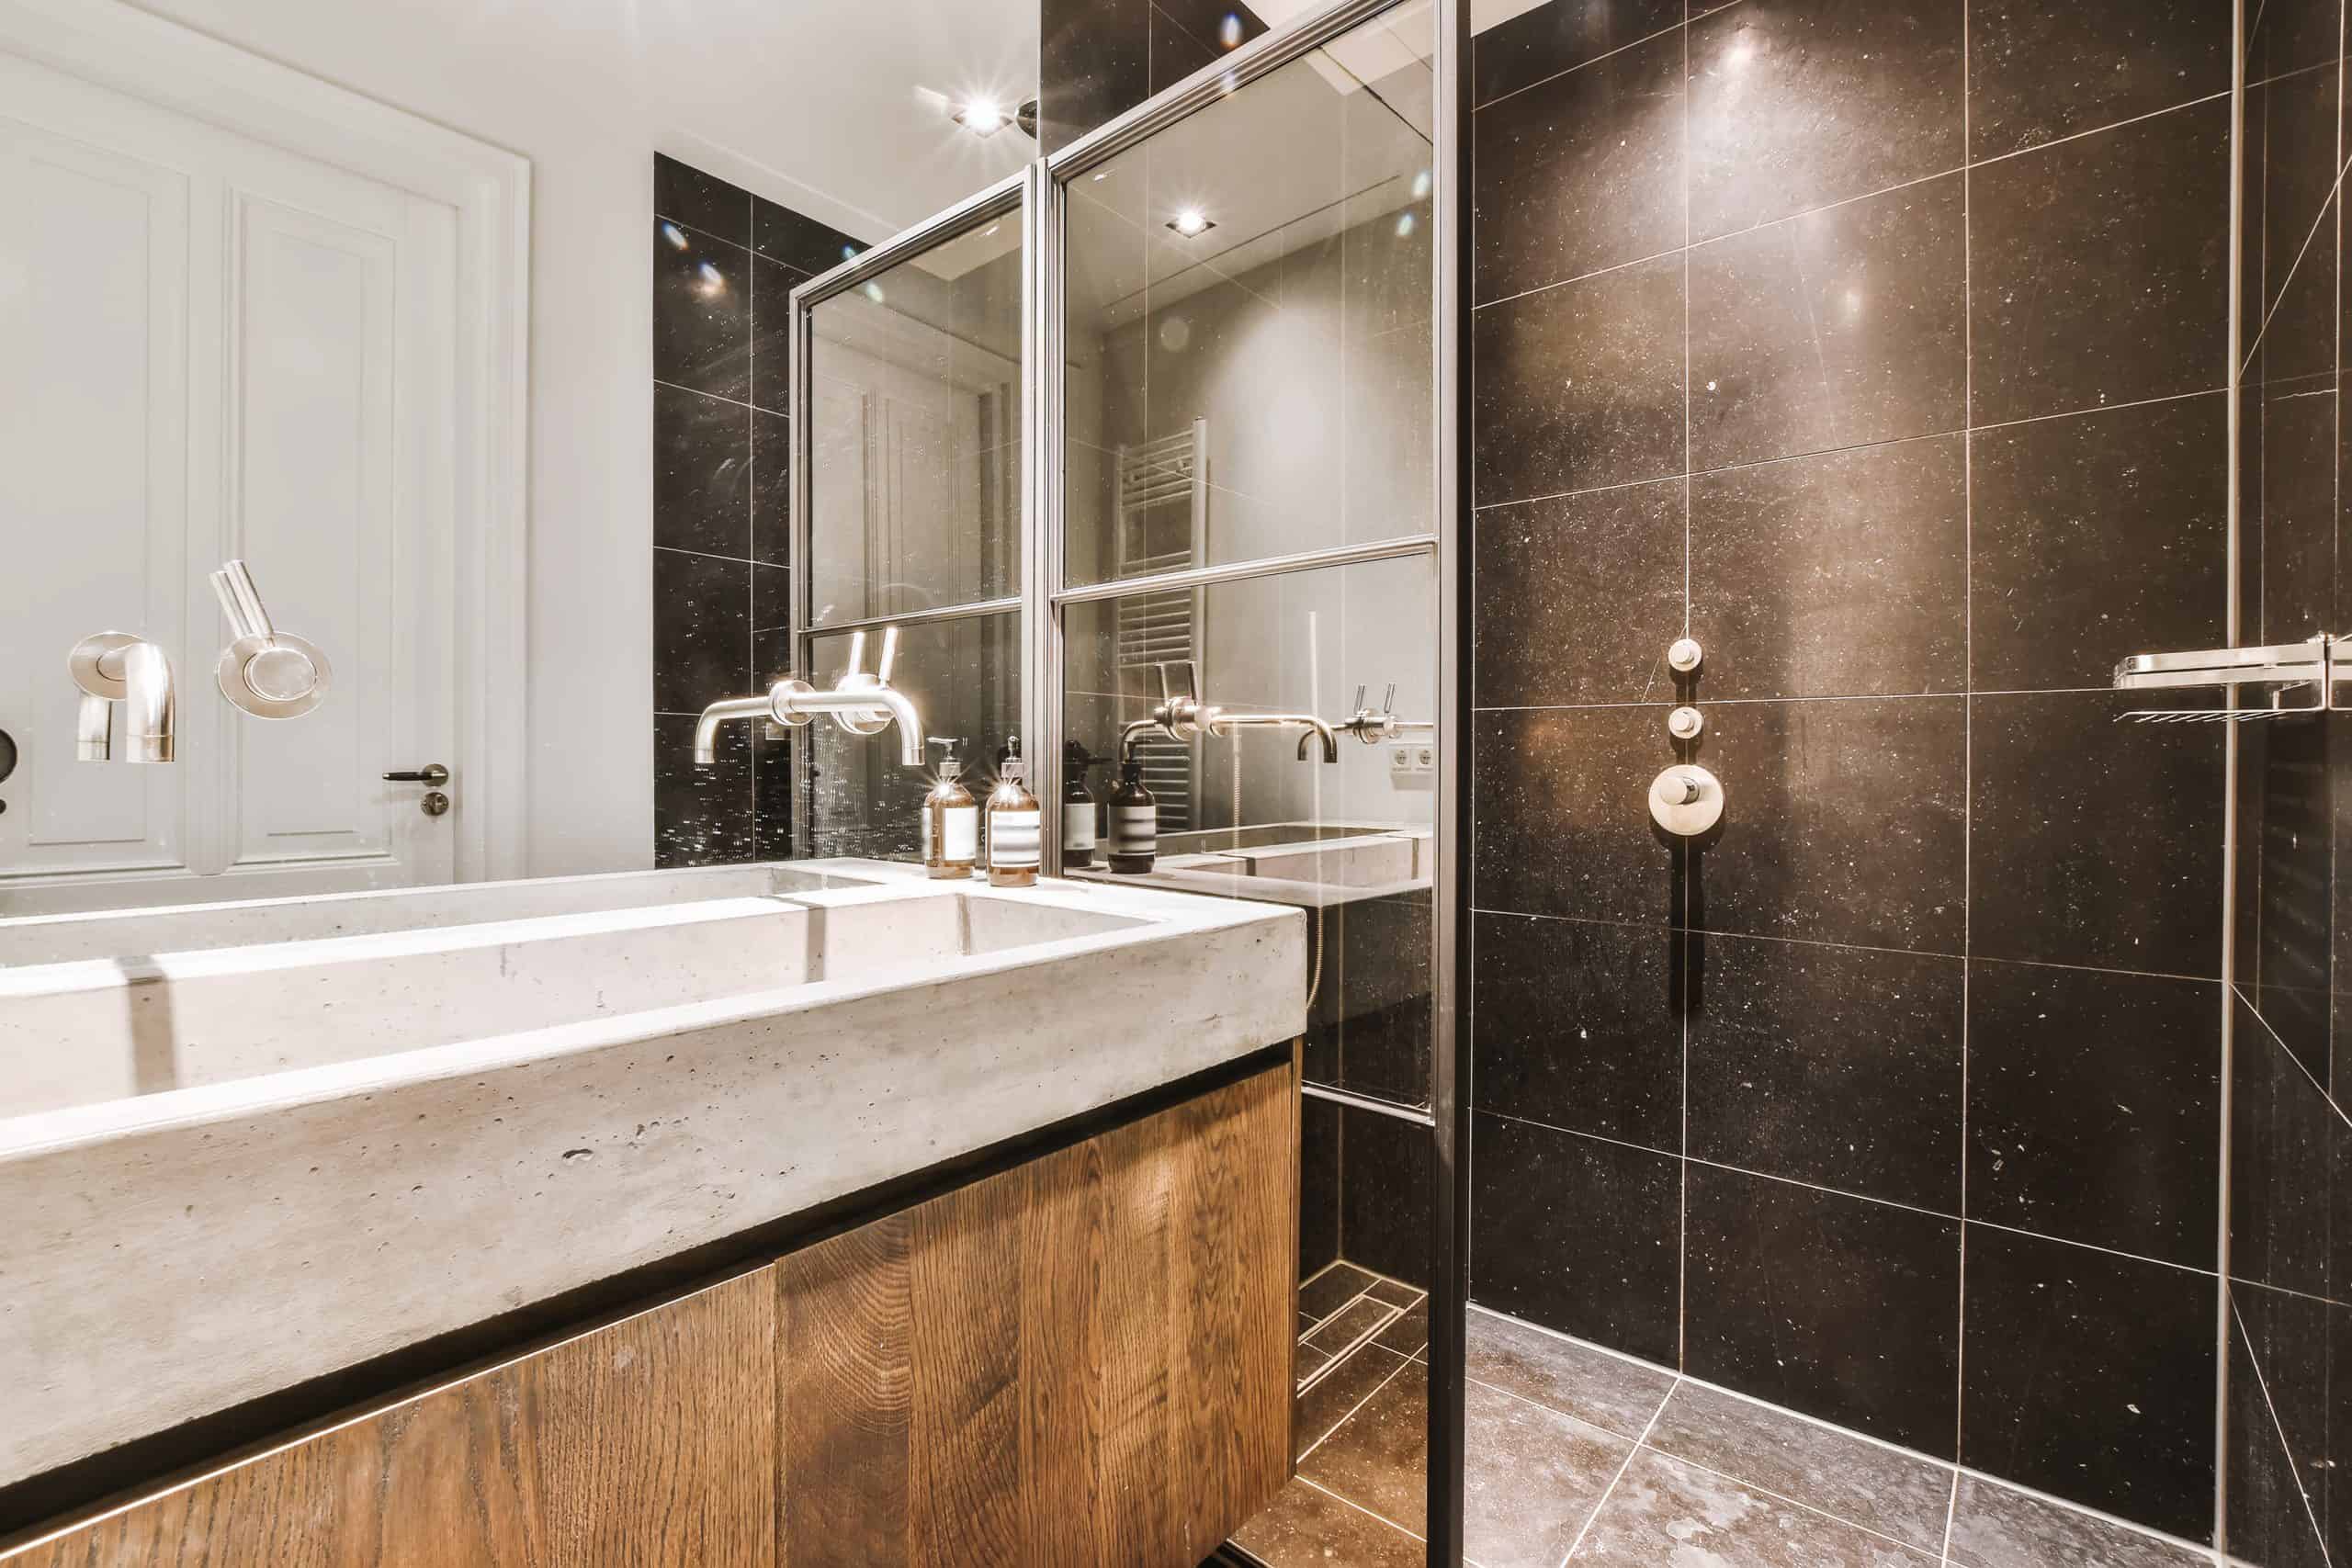 Remodeling Bathrooms on a Budget